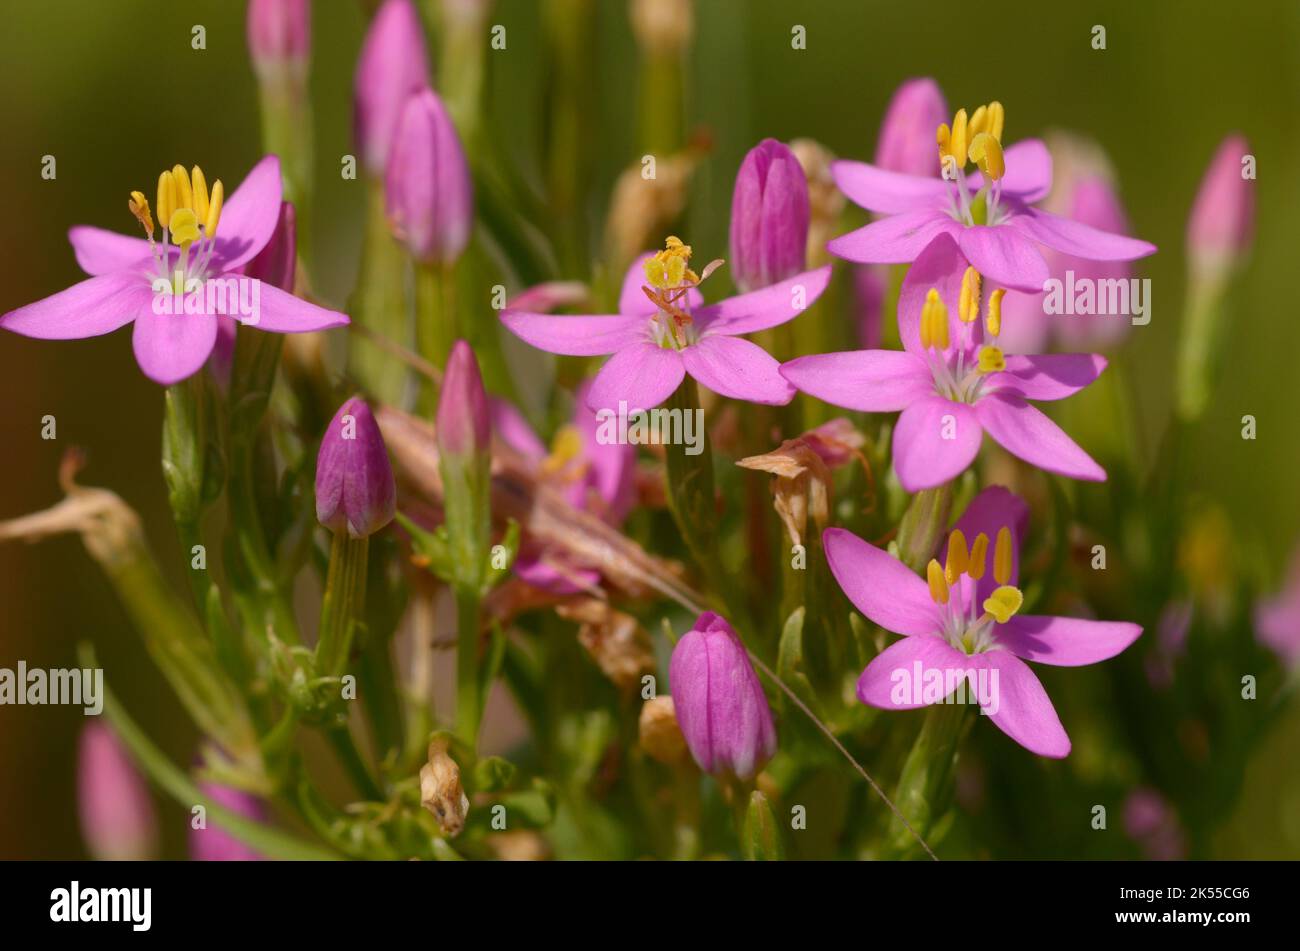 Pink wildflowers of common Centaury, Centaurium erythraea, blooming in a field. Medicinal herb. Stock Photo